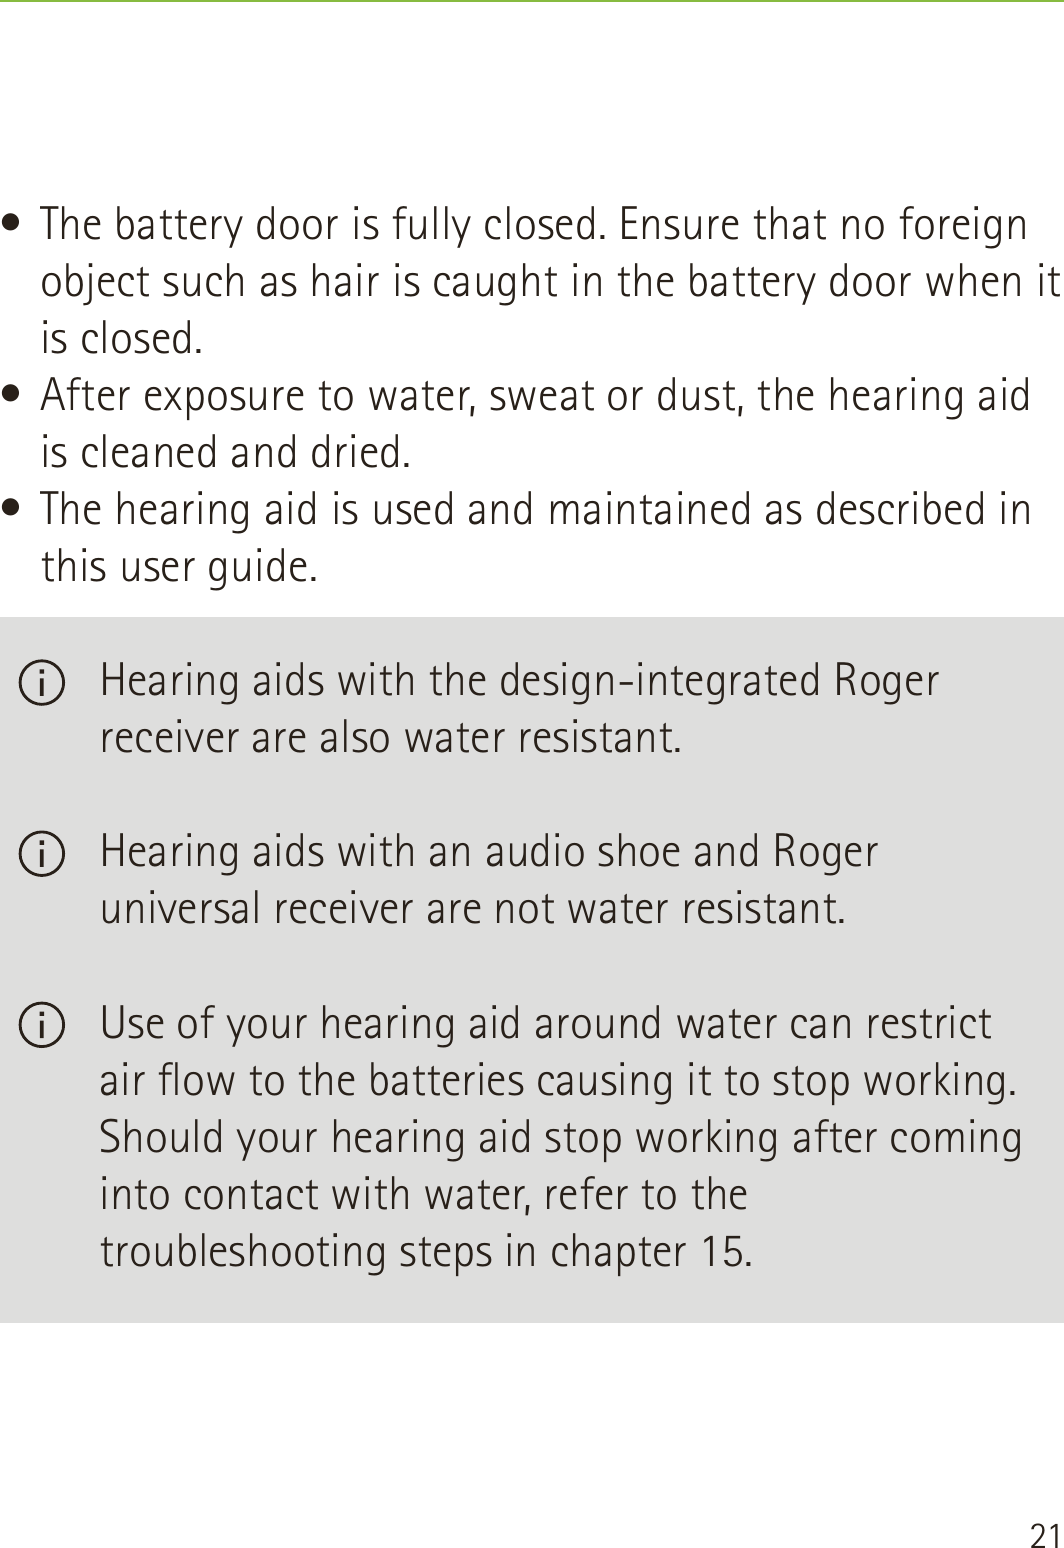 21• The battery door is fully closed. Ensure that no foreign object such as hair is caught in the battery door when it is closed.• After exposure to water, sweat or dust, the hearing aid is cleaned and dried.• The hearing aid is used and maintained as described in this user guide.   Hearing aids with the design-integrated Roger receiver are also water resistant.   Hearing aids with an audio shoe and Roger universal receiver are not water resistant.   Use of your hearing aid around water can restrict air ow to the batteries causing it to stop working. Should your hearing aid stop working after coming into contact with water, refer to the troubleshooting steps in chapter 15.